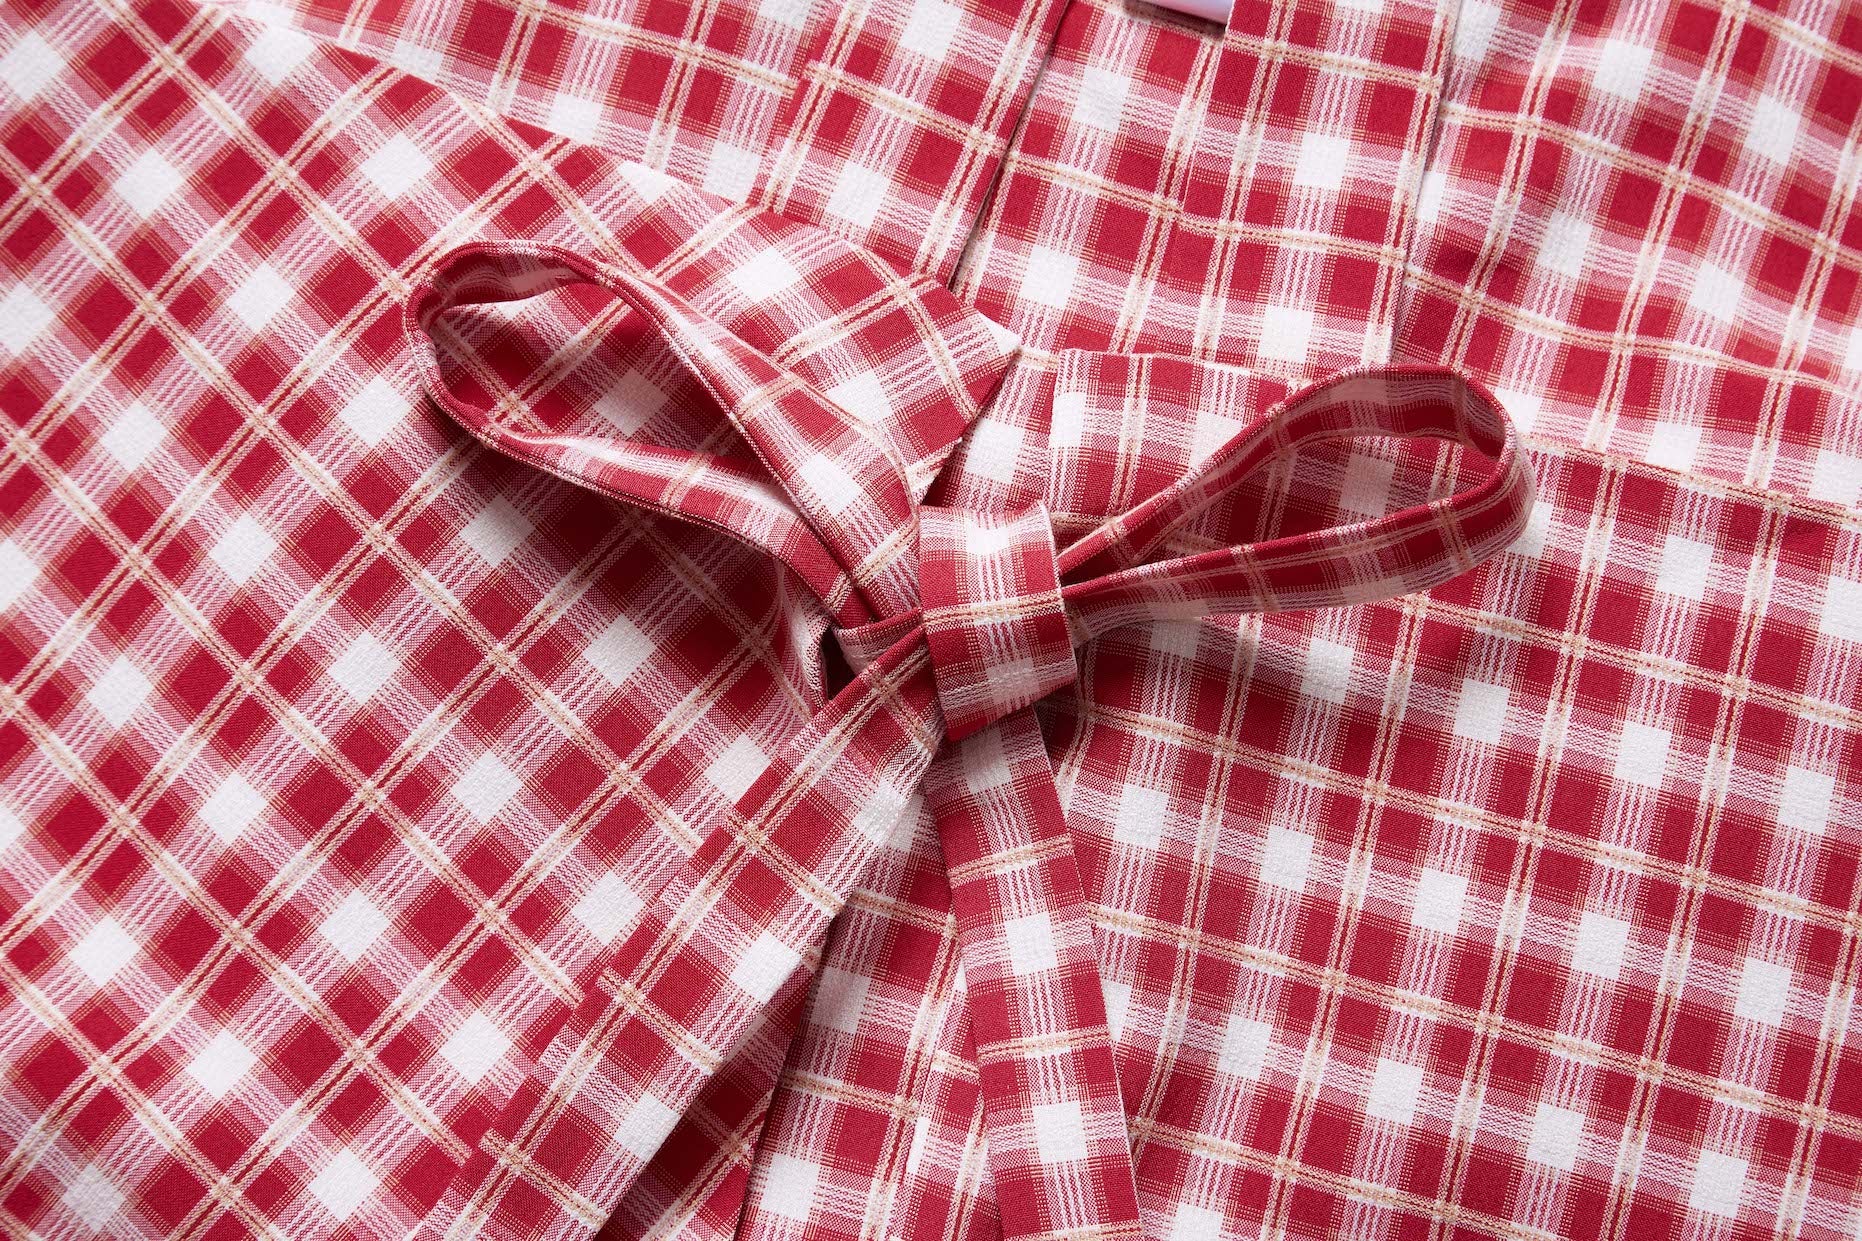 Load image into Gallery viewer, Picnic Apron
